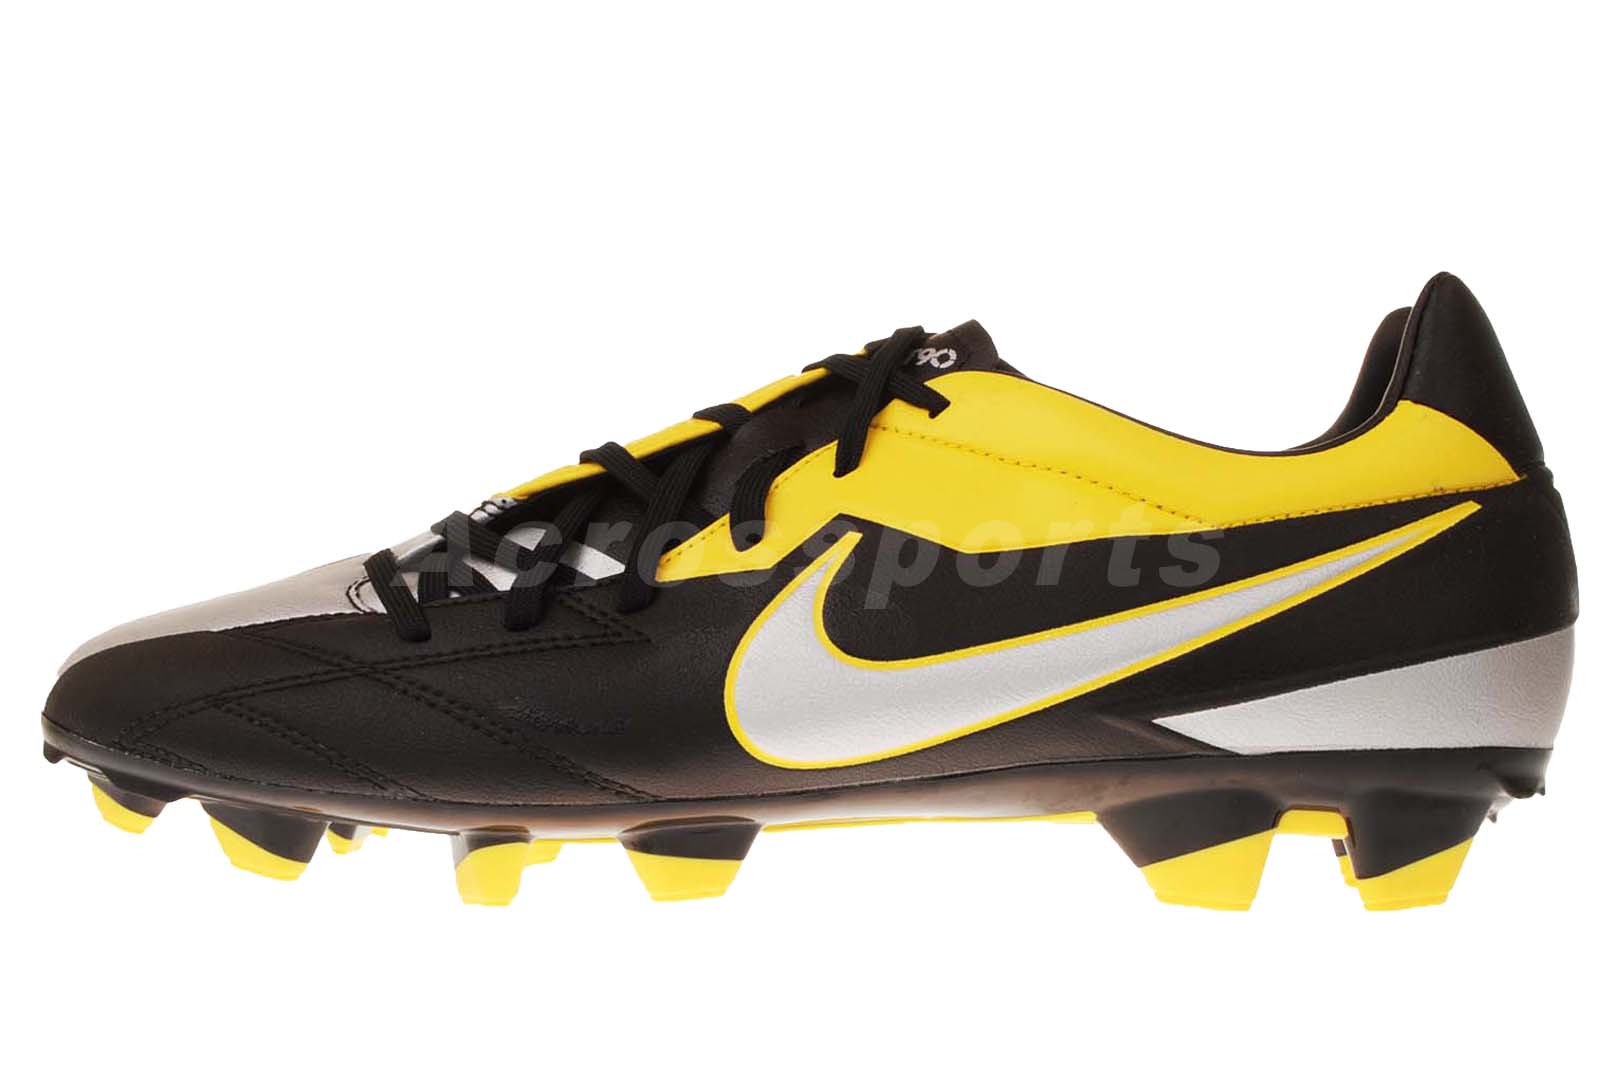 Nike T90 Strike IV FG Black Yellow Silver Mens Soccer Cleats Shoes 472562 007   US Size 8.5